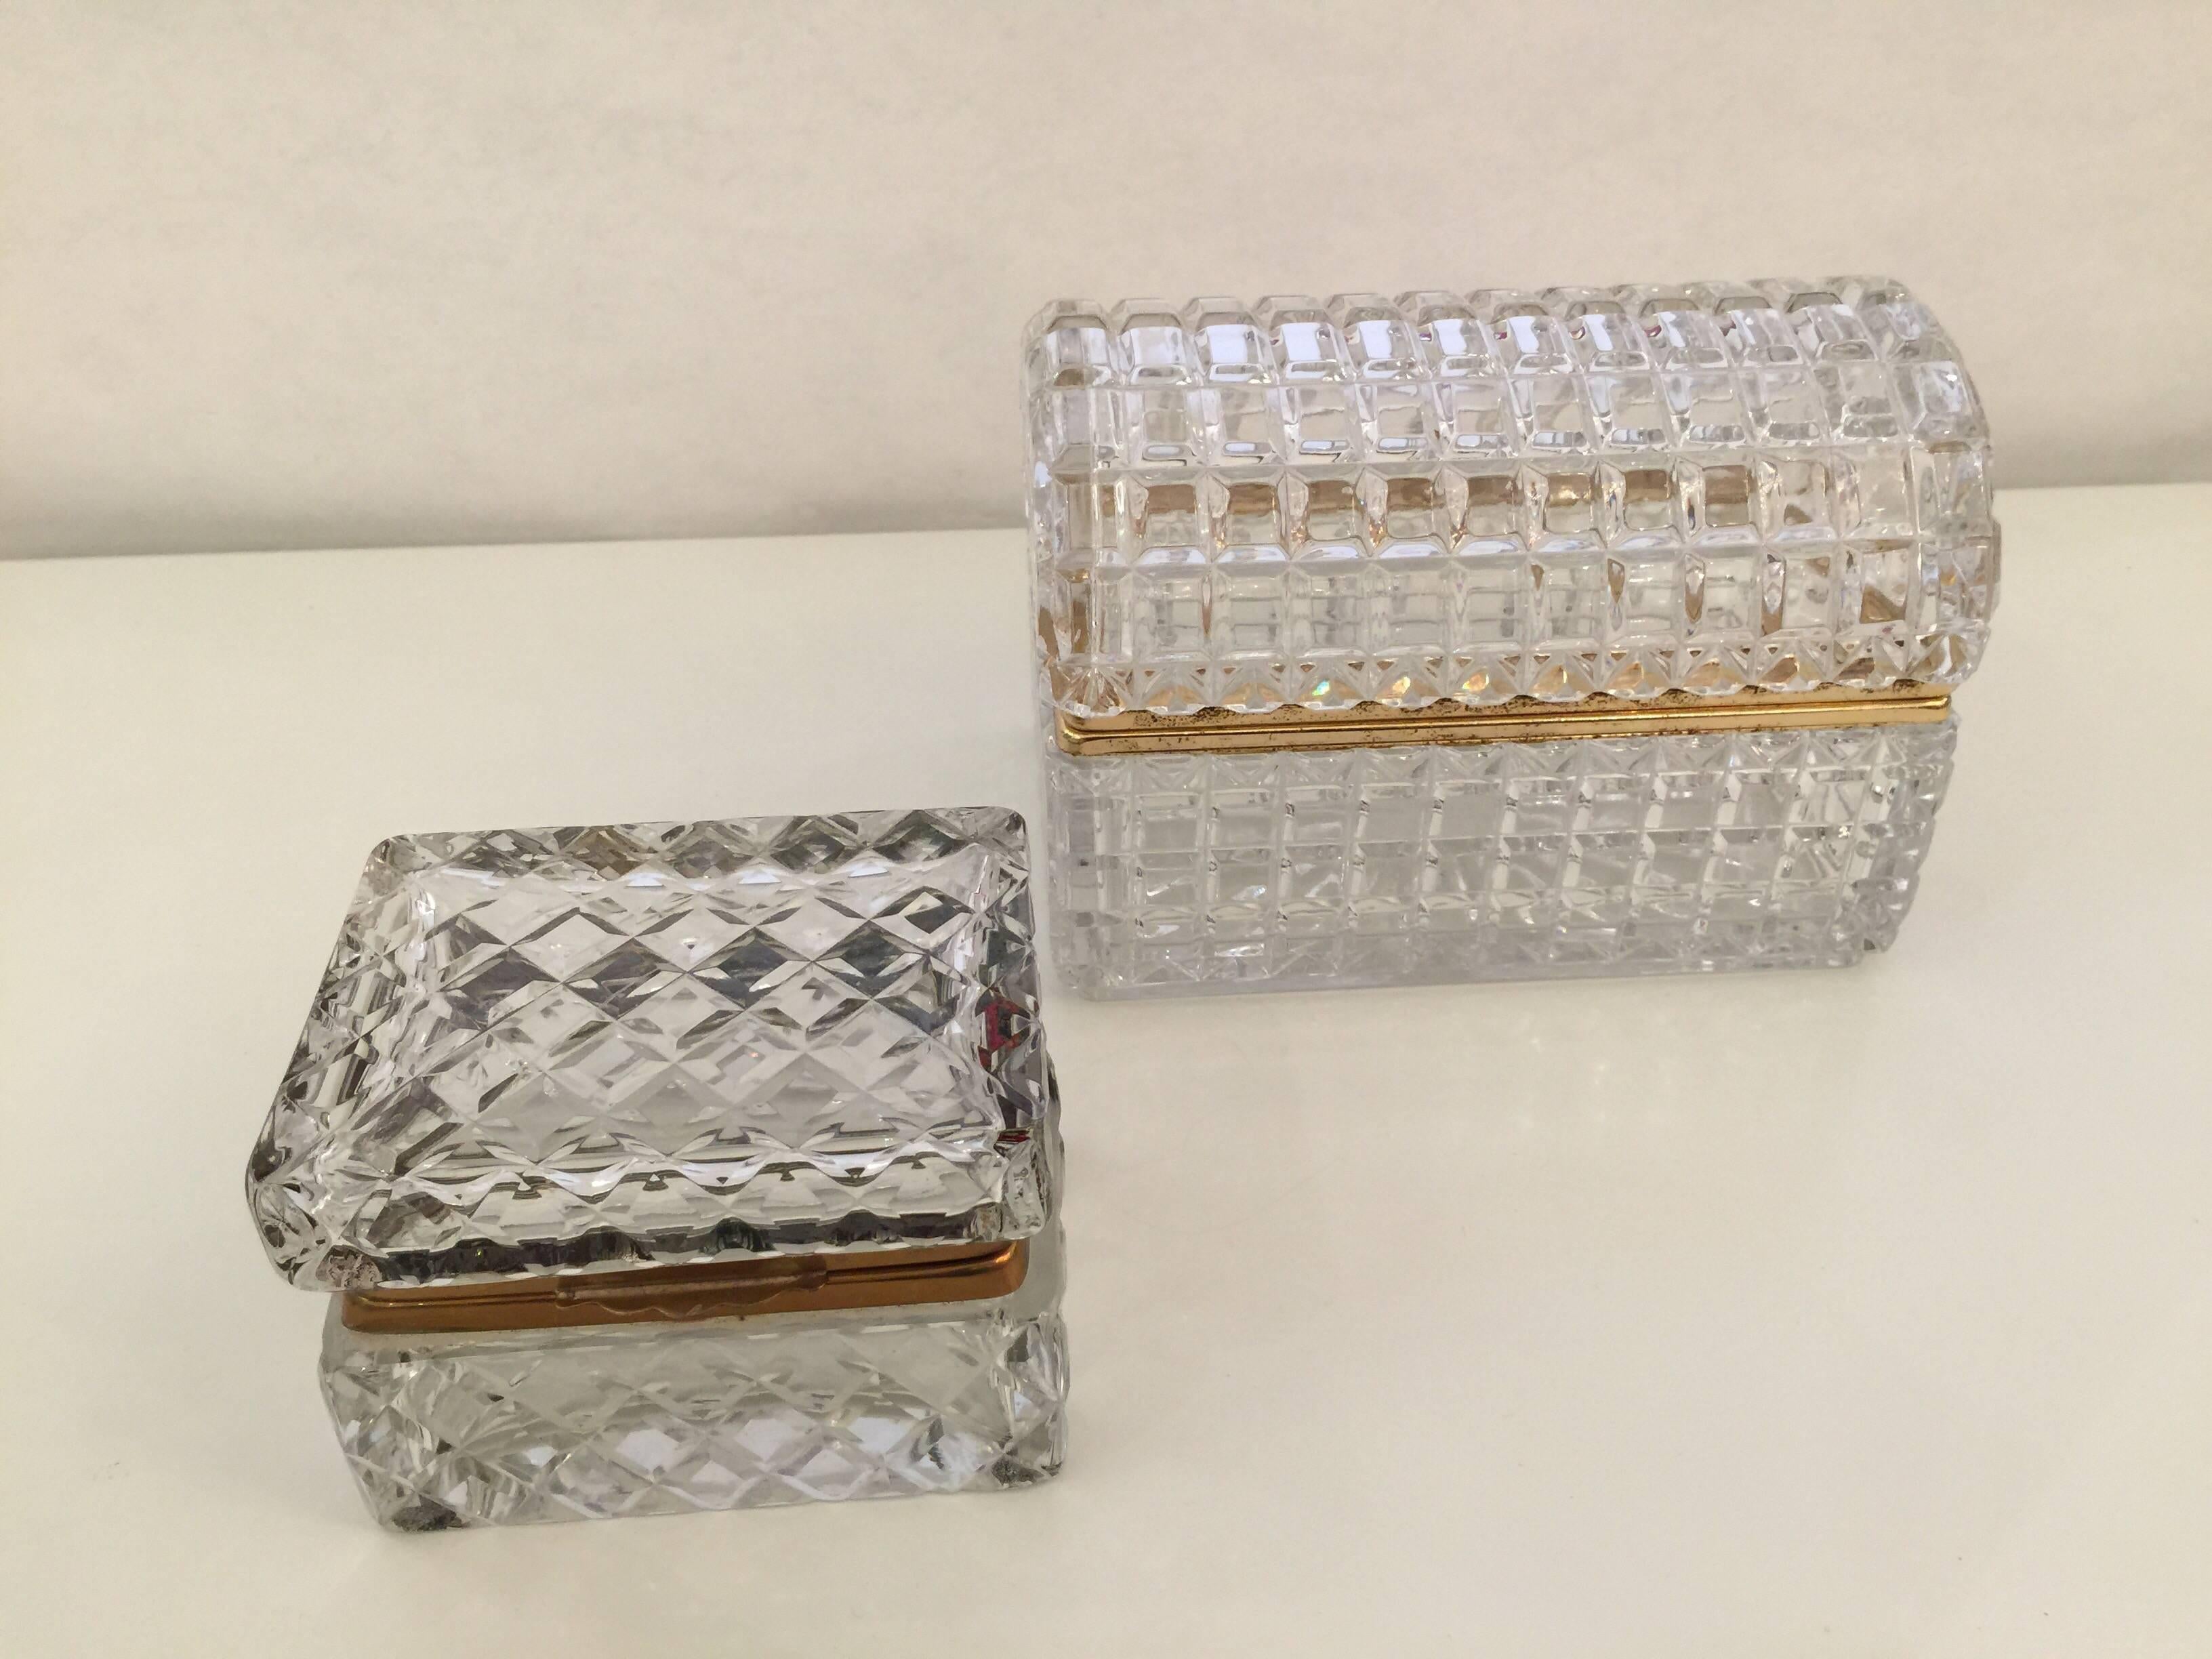 Trimmed with gilt metal hardware and patterned glass design throughout, these two boxes are a wonderful set (domed and square top).

Dimensions: Large box is 5.5 inches tall, 7.5 inches wide, 4.5 inches deep
Small box is 3.25 inches tall, 4.5